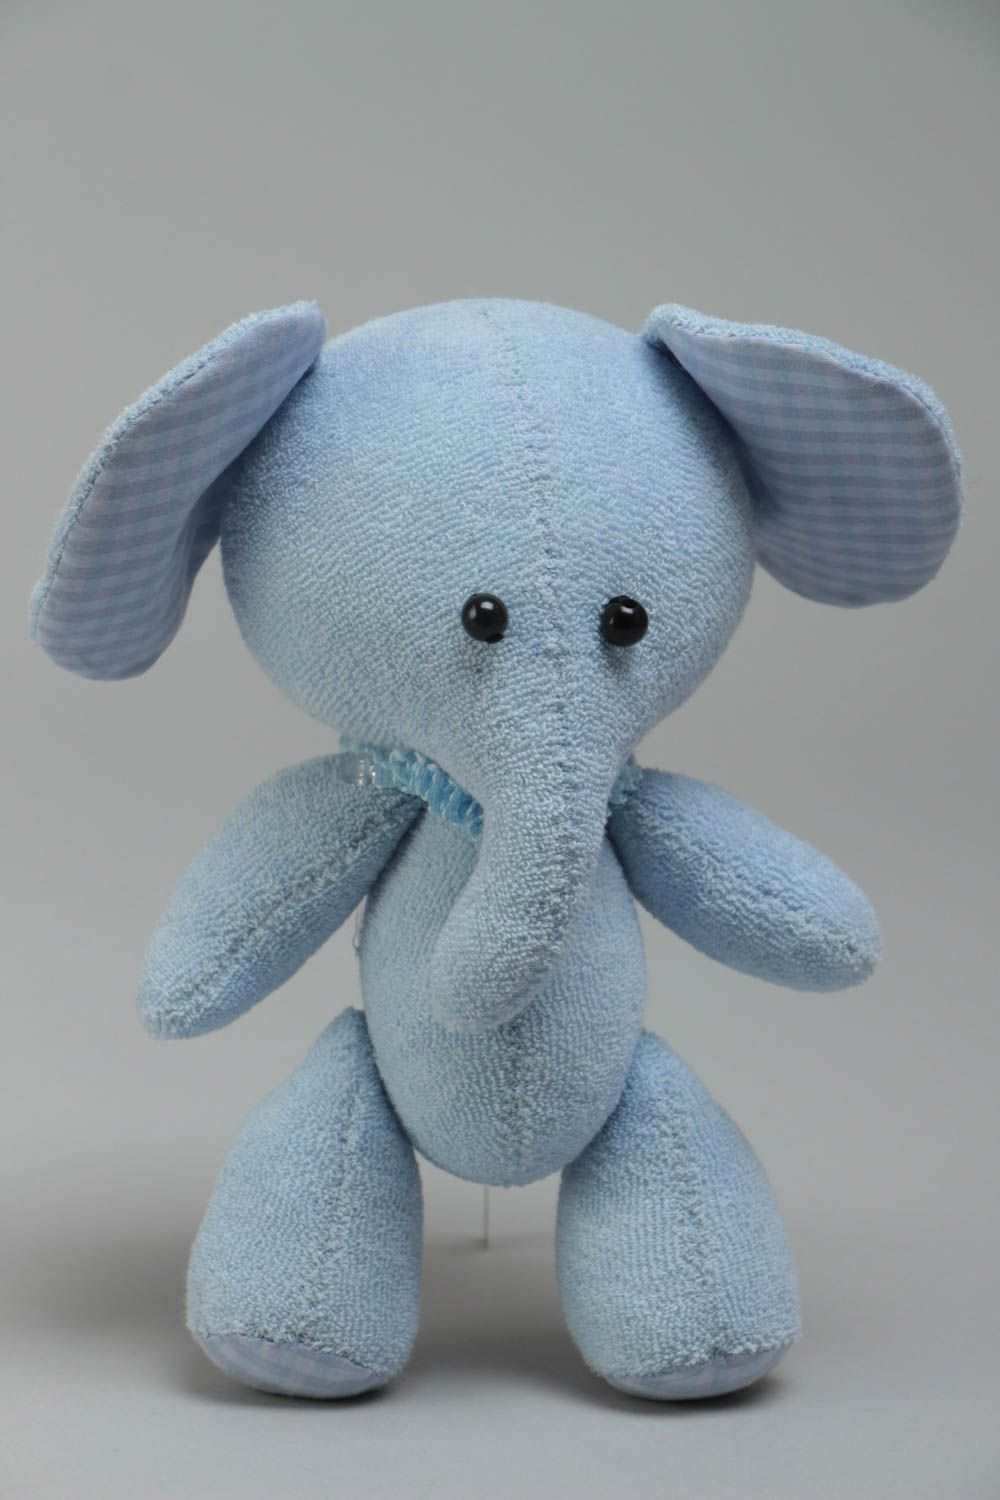 Handmade soft toy sewn of jersey and mohair fabric small blue elephant for kids photo 2